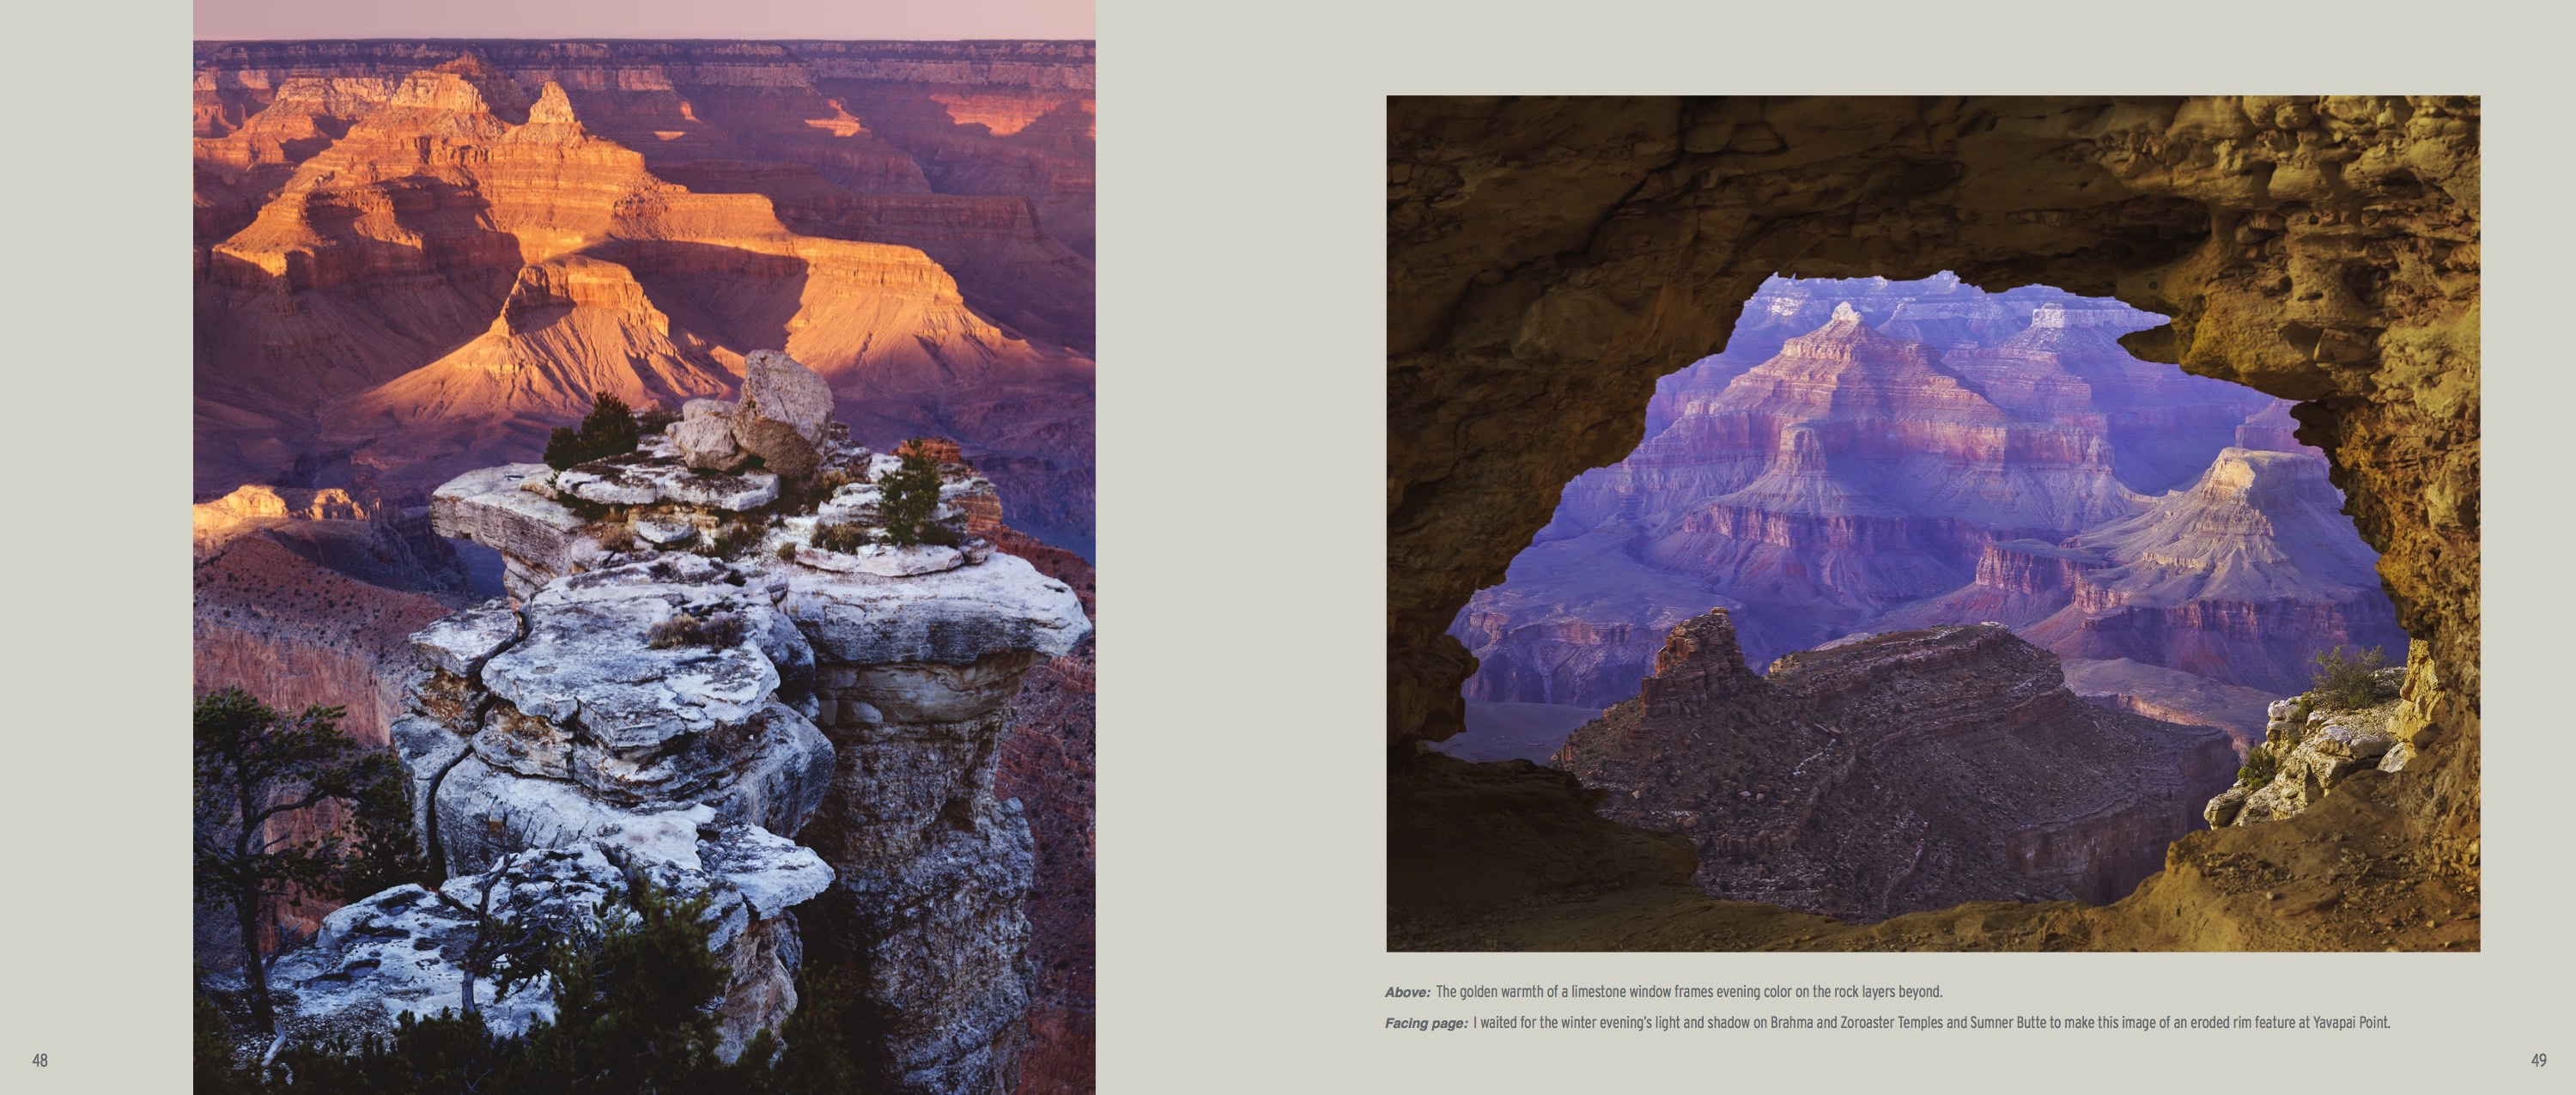 Yavapai Point p. 48 from David Muench's Timeless Moments: Grand Canyon National Park